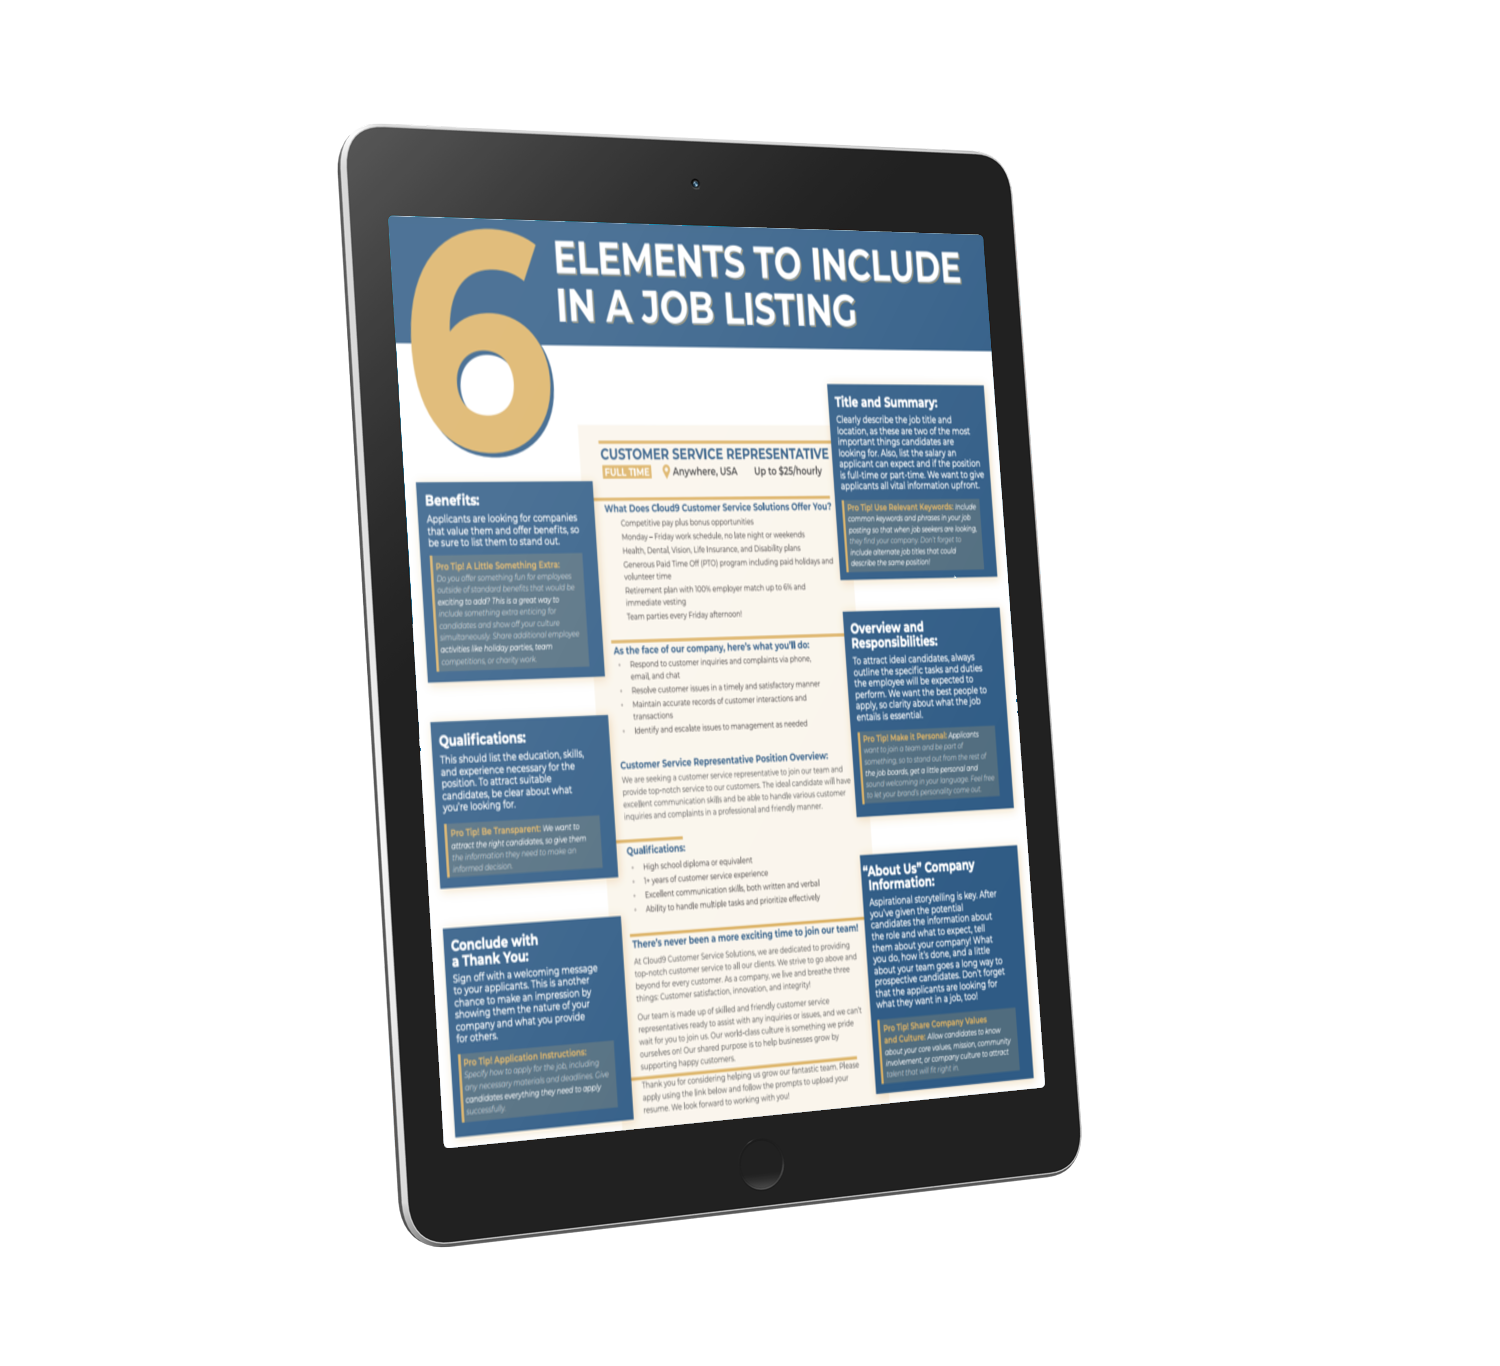 6 Elements to Include in a Job Listing